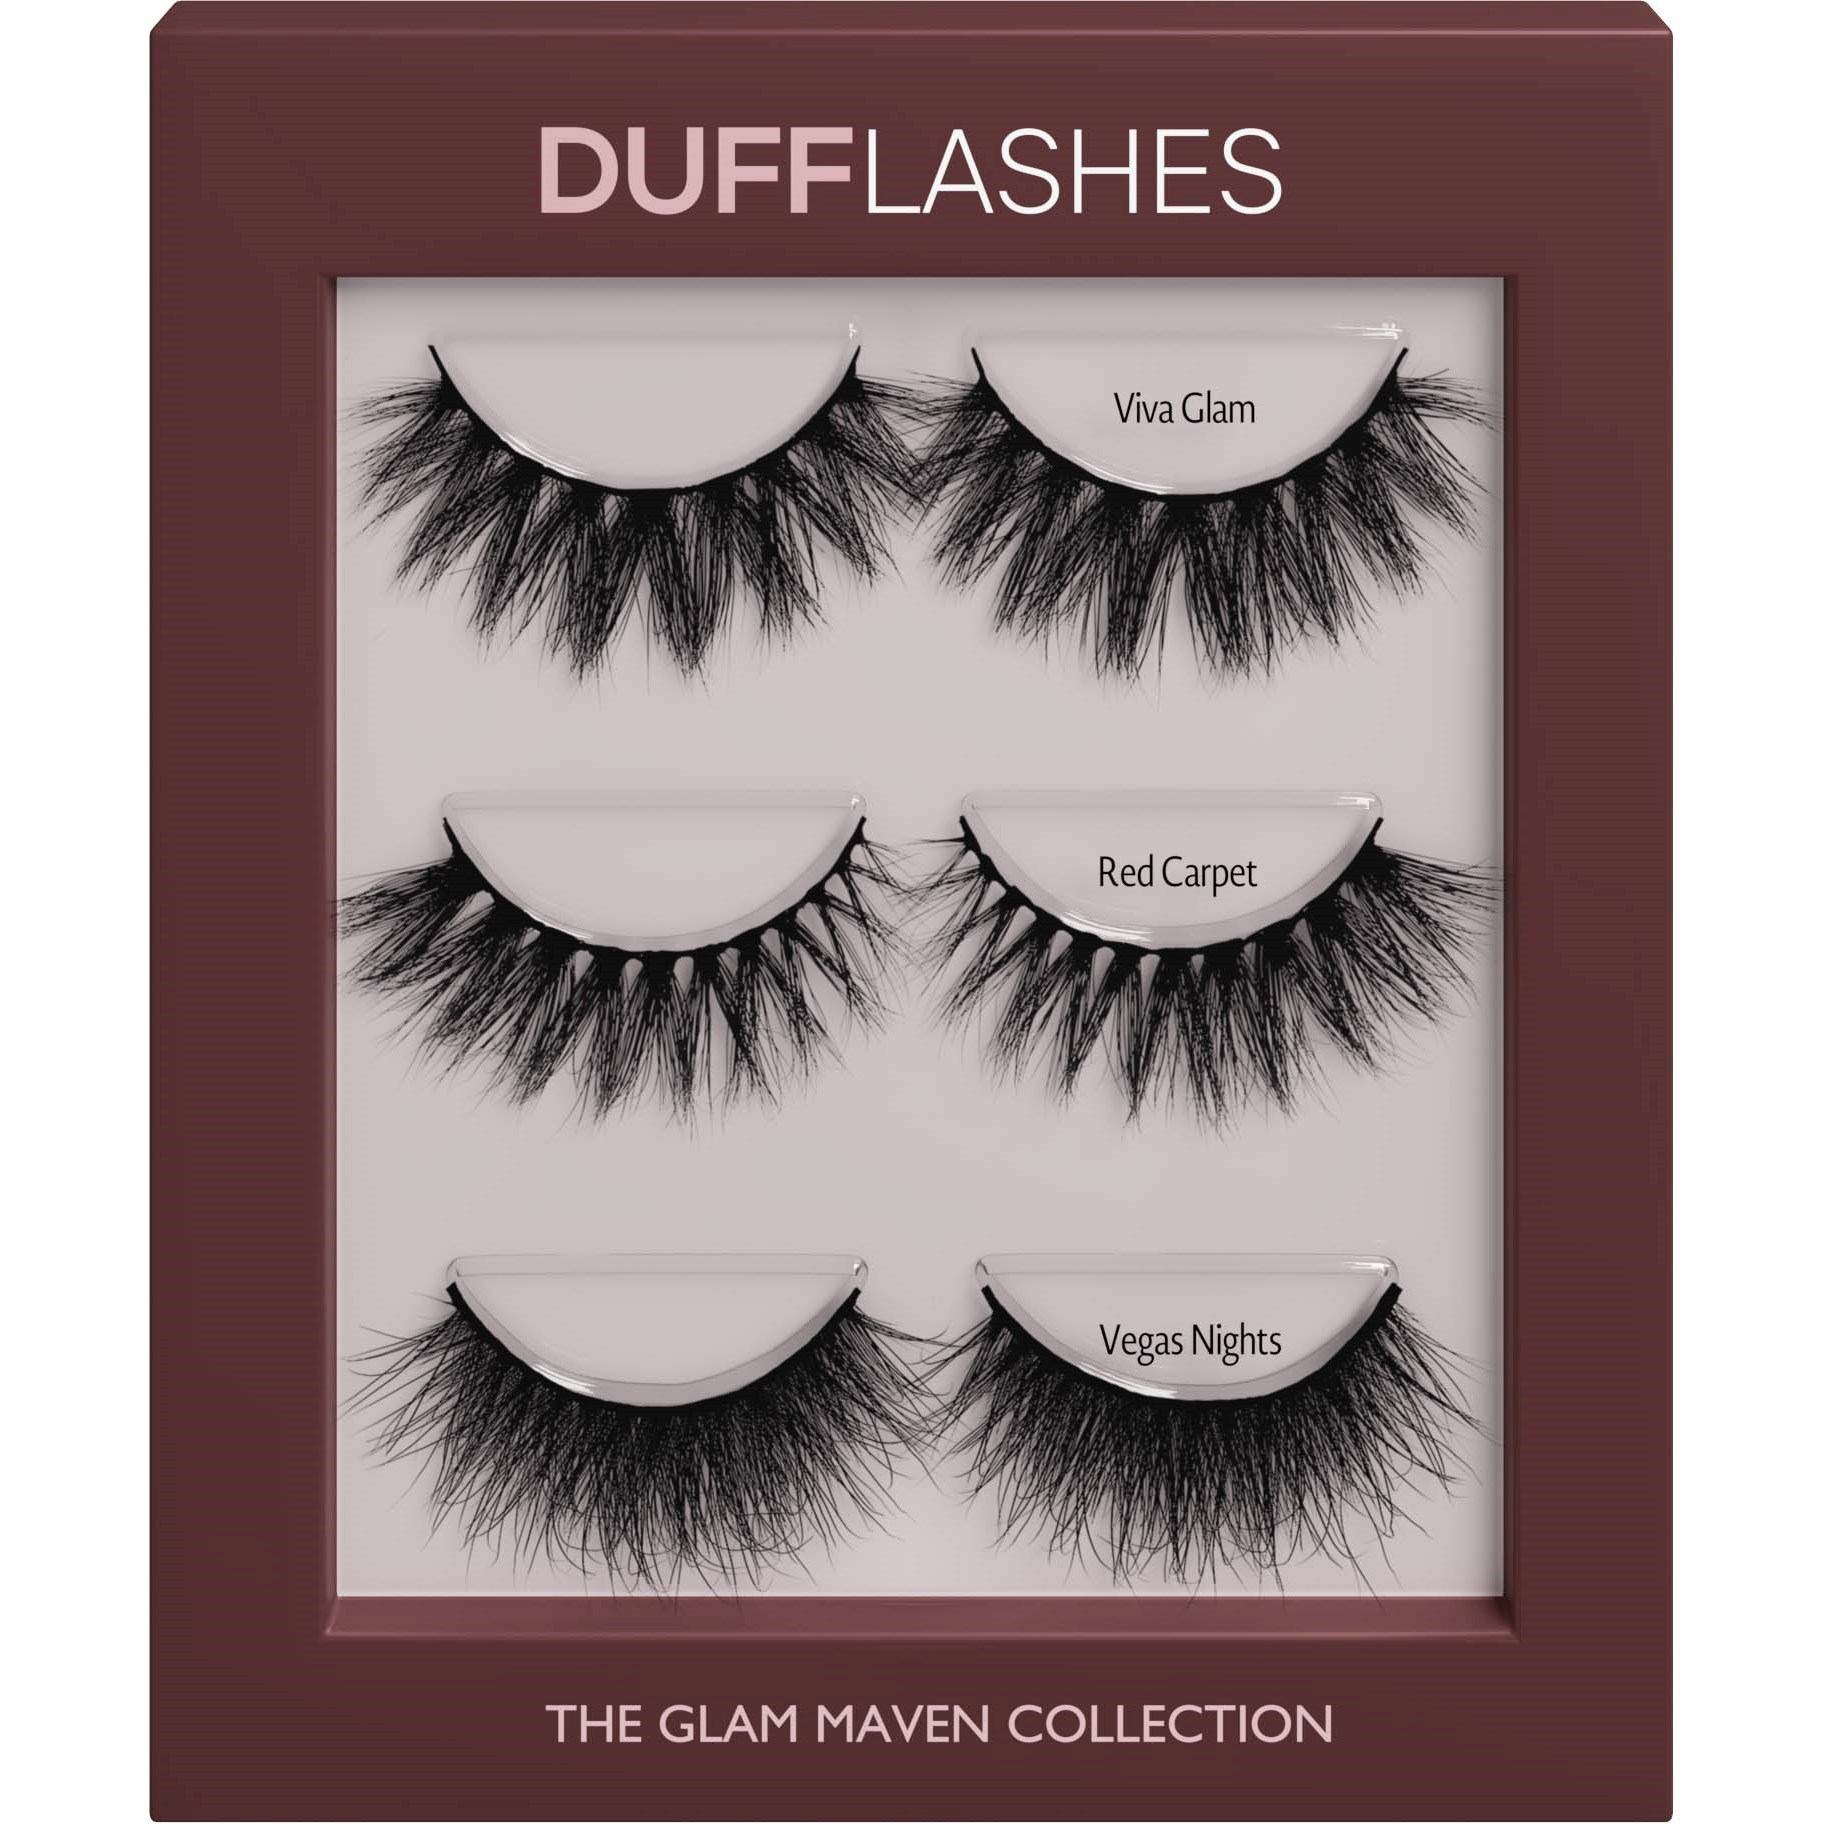 DUFFBEAUTY Glam Maven Collection